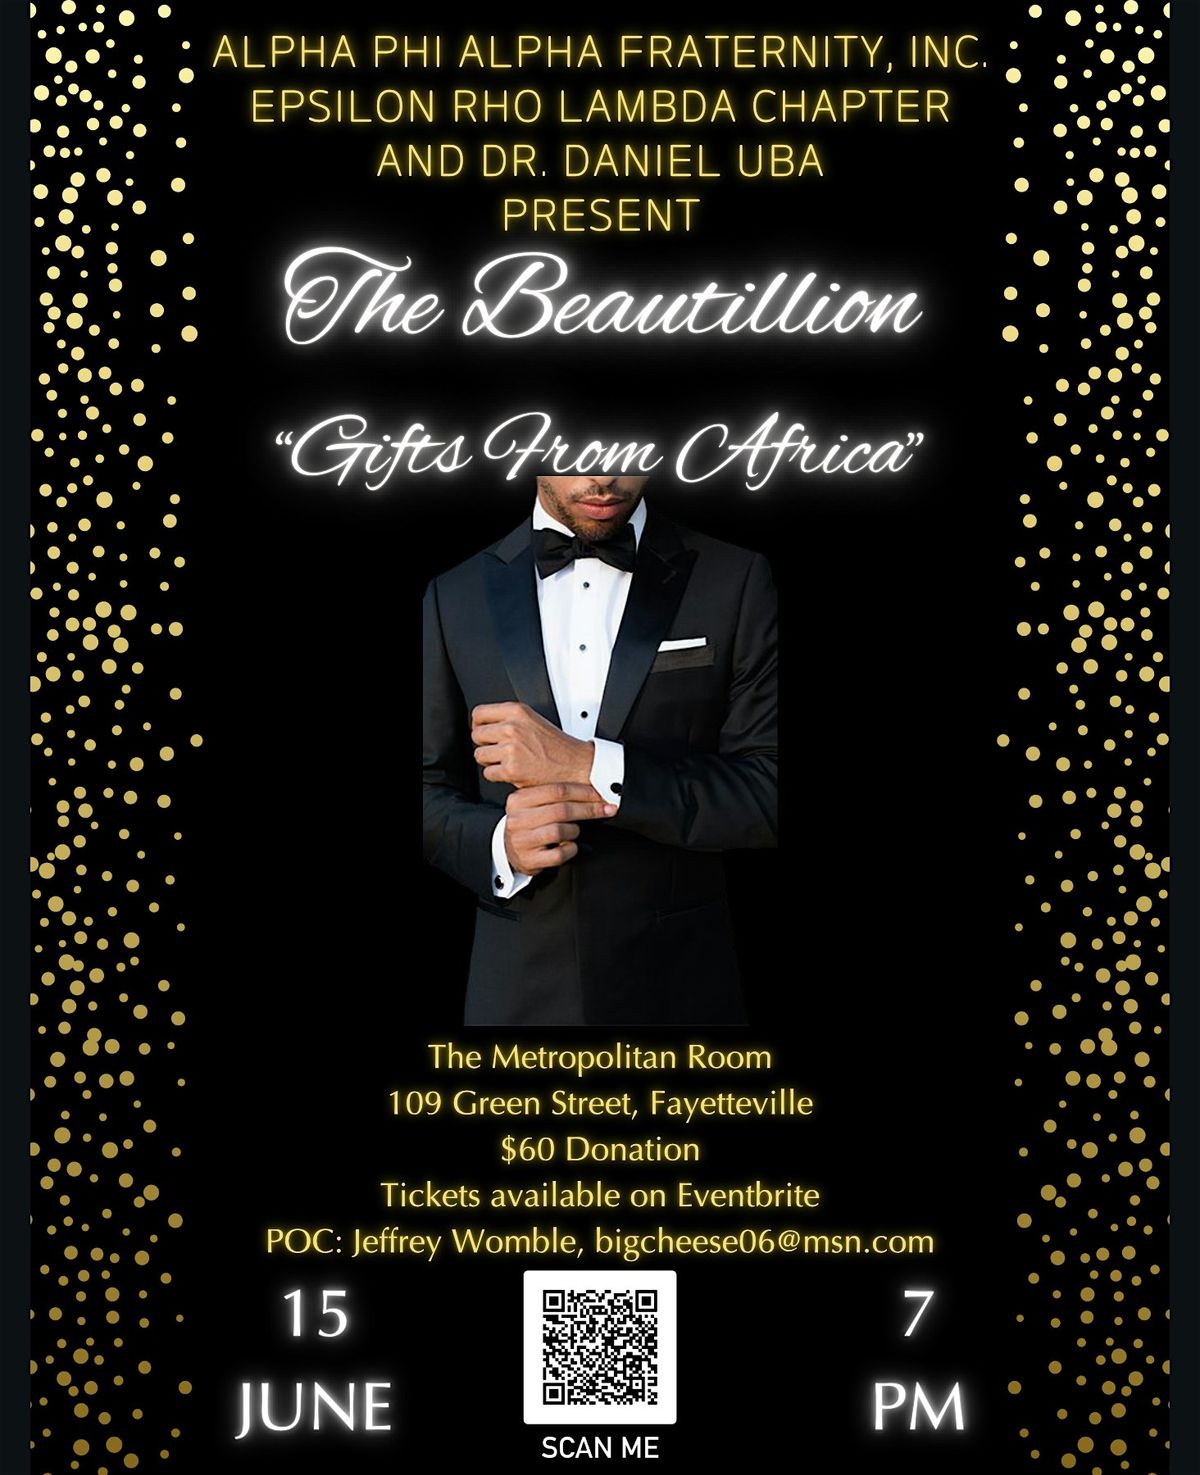 The Beautillion "Gifts From Africa"